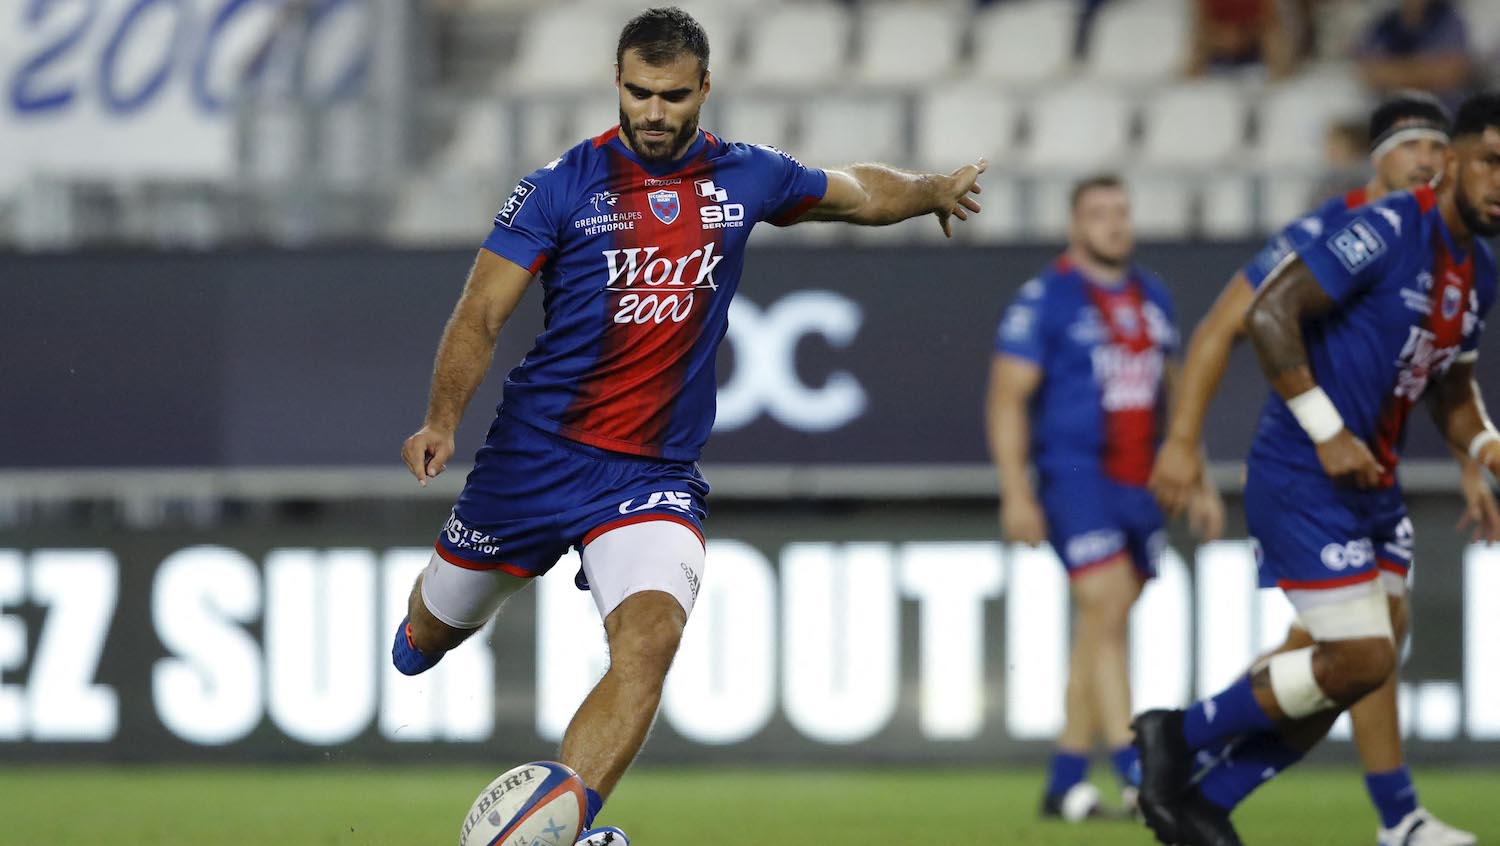 PRO D2 | PROVENCE RUGBY - FC GRENOBLE : 17-26